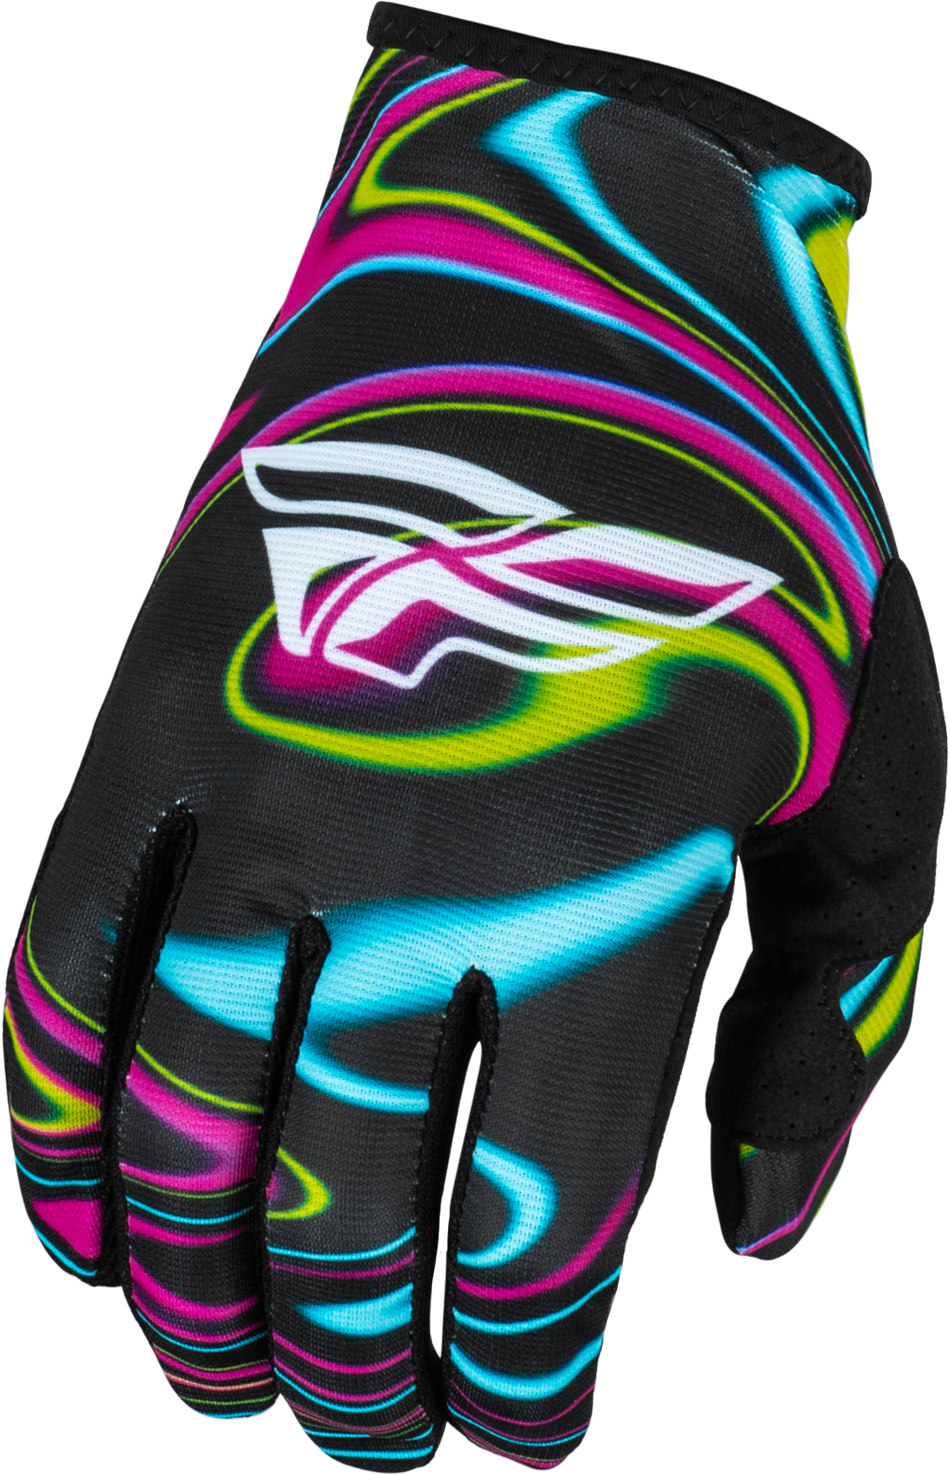 FLY RACING Youth Lite Warped Gloves Black/Pink/Electric Blue Ys 377-743YS